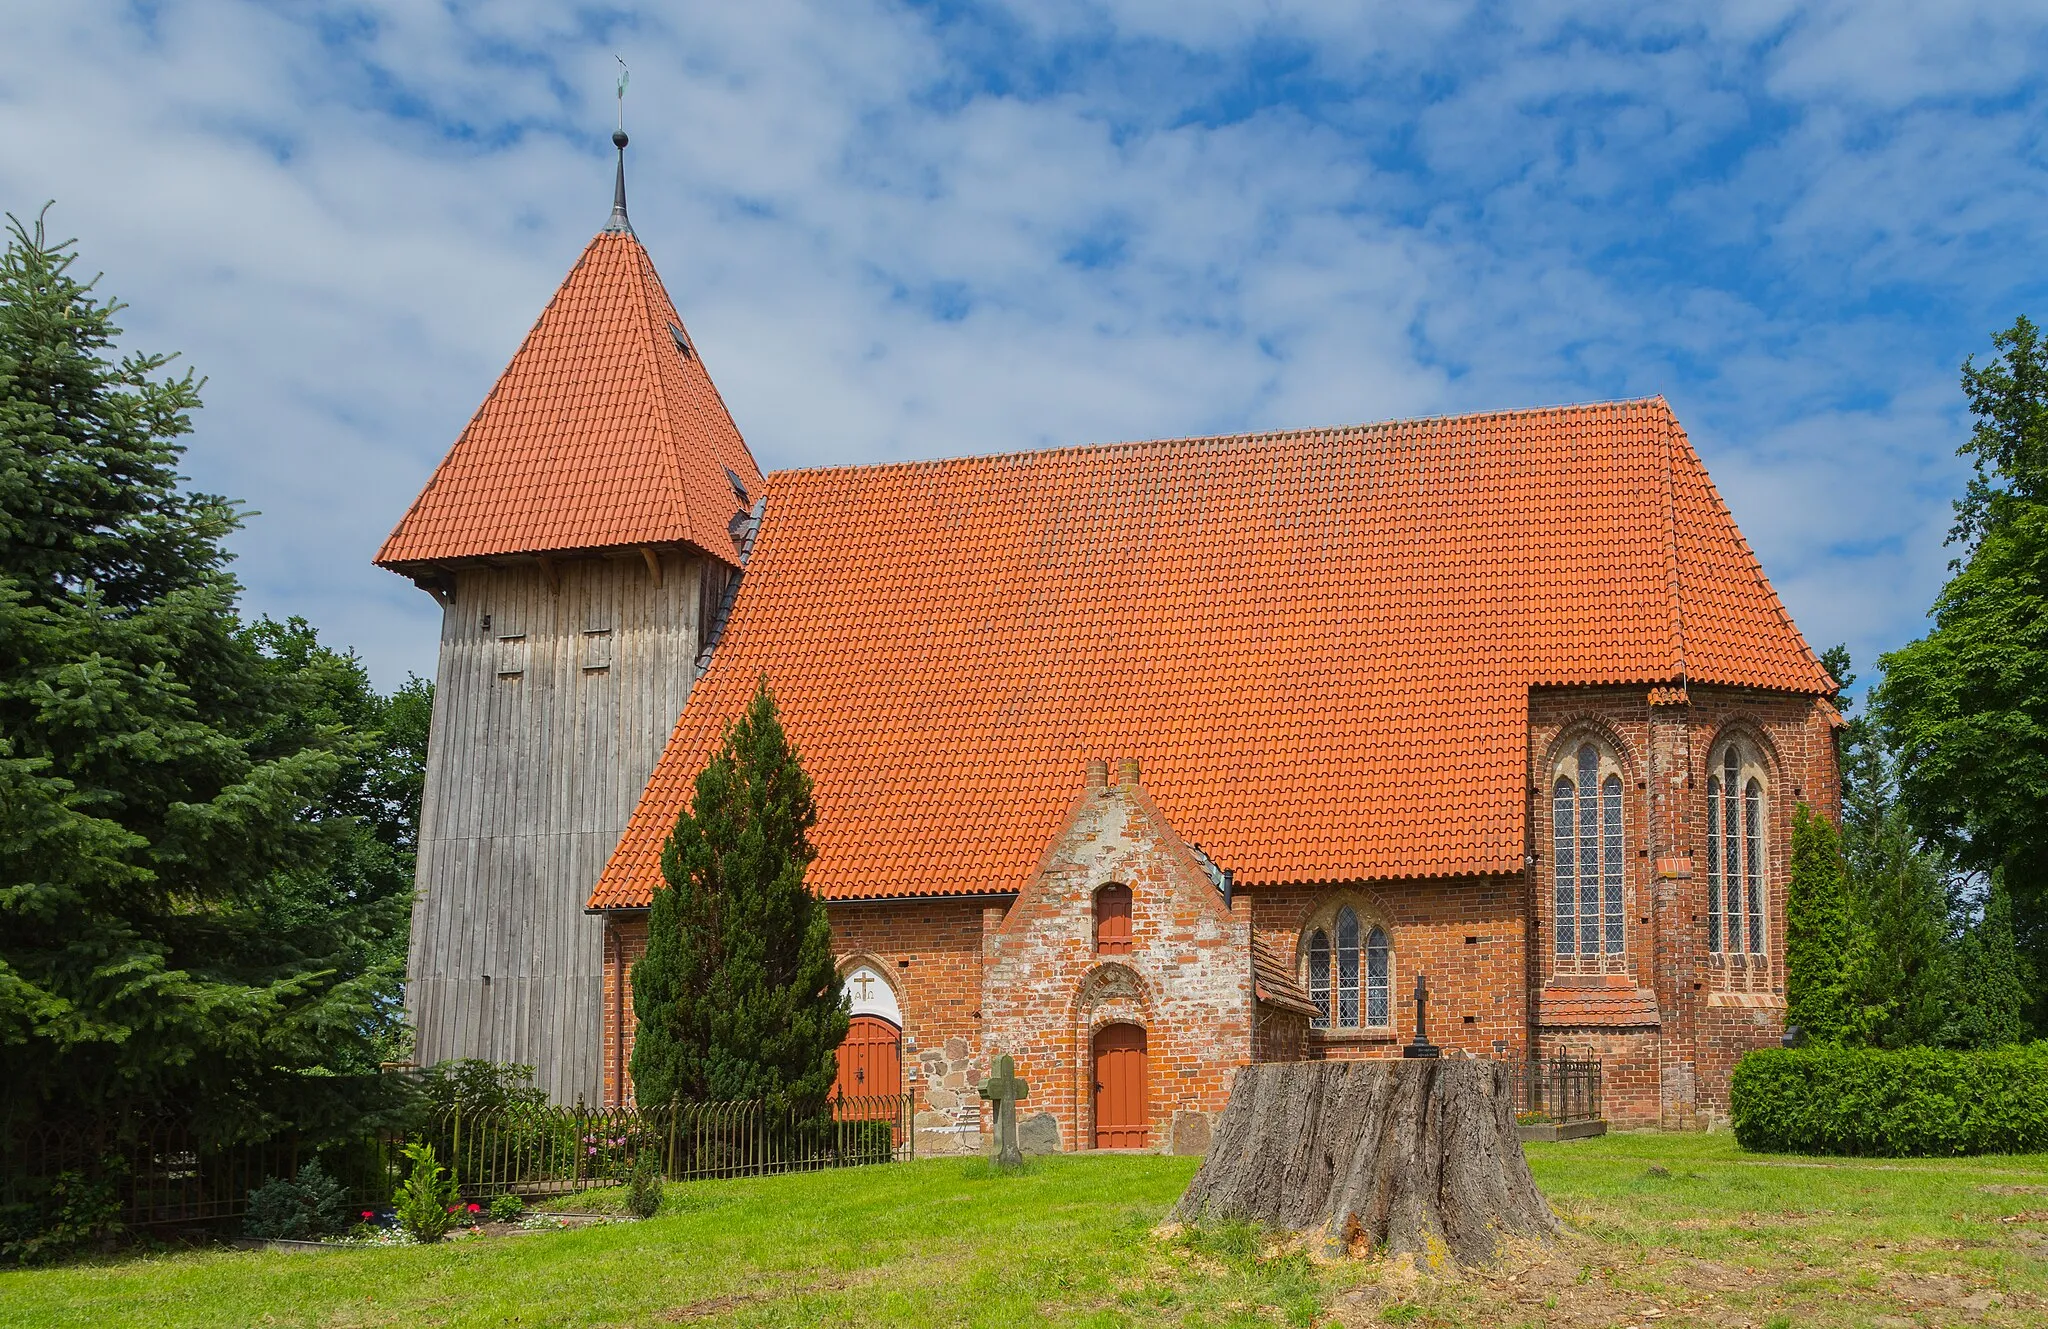 Photo showing: The Lutheran Village Church of Rethwisch, district of Börgerende-Rethwisch, Landkreis Rostock, Mecklenburg-Vorpommern, Germany. The church is a listed cultural heritage monument.